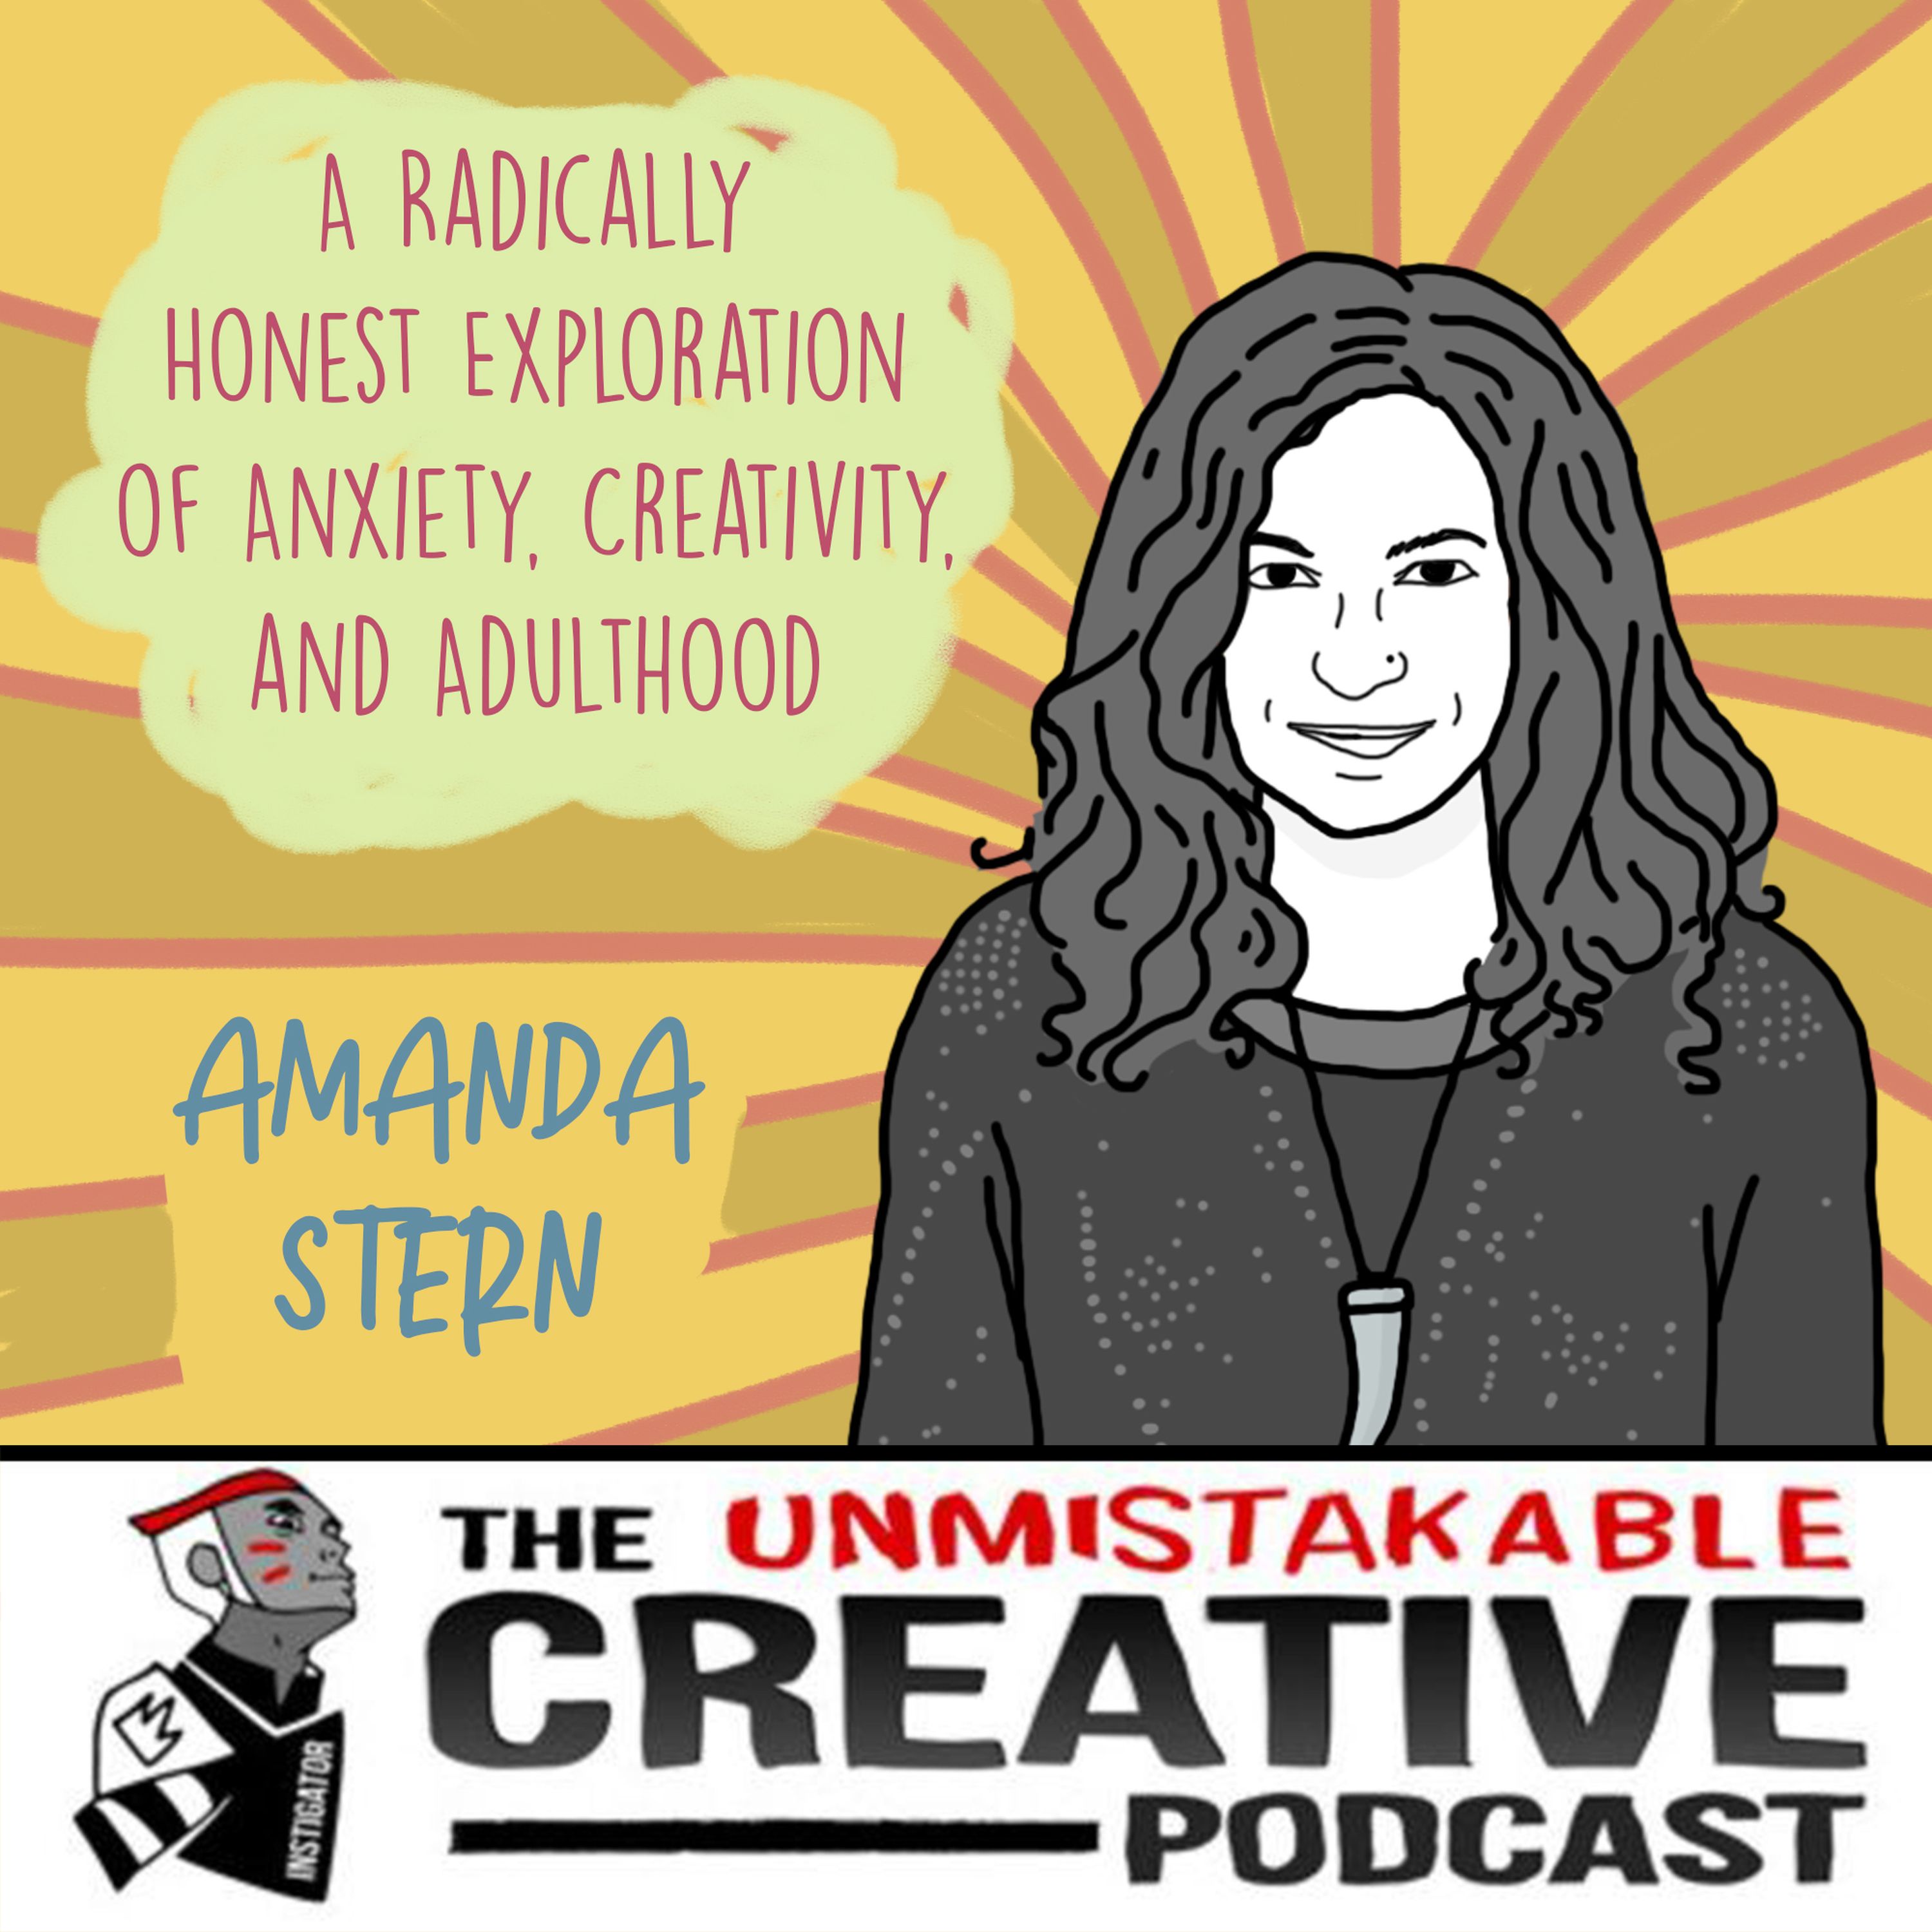 A Radically Honest Exploration of Anxiety, Creativity, and Adulthood with Amanda Stern